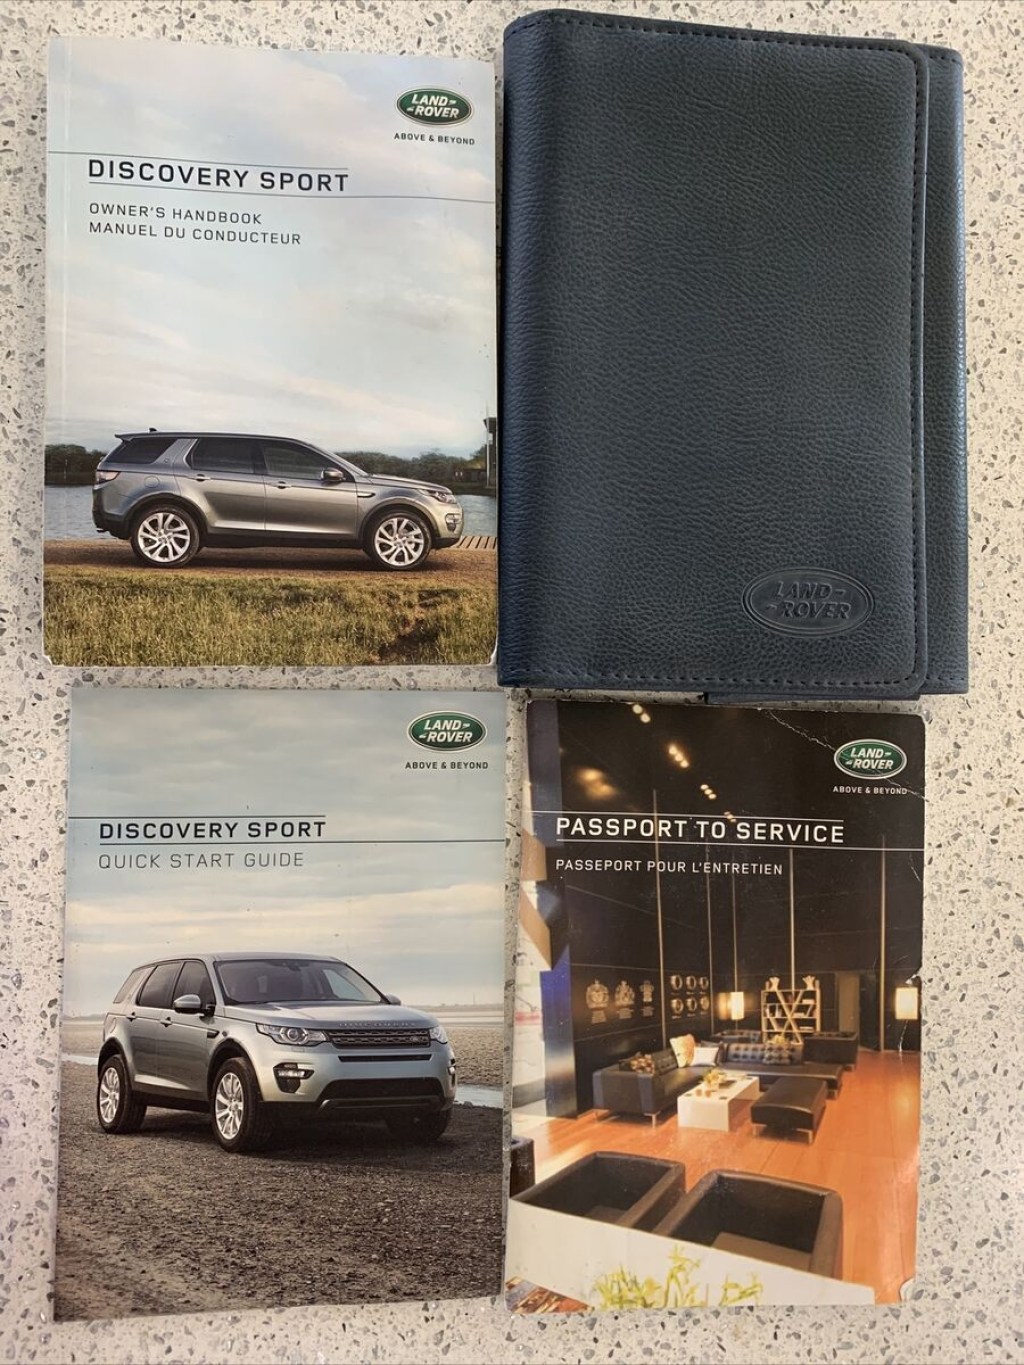 Picture of: Land Rover Range Rover Discovery Sport SE Owner’s Manual